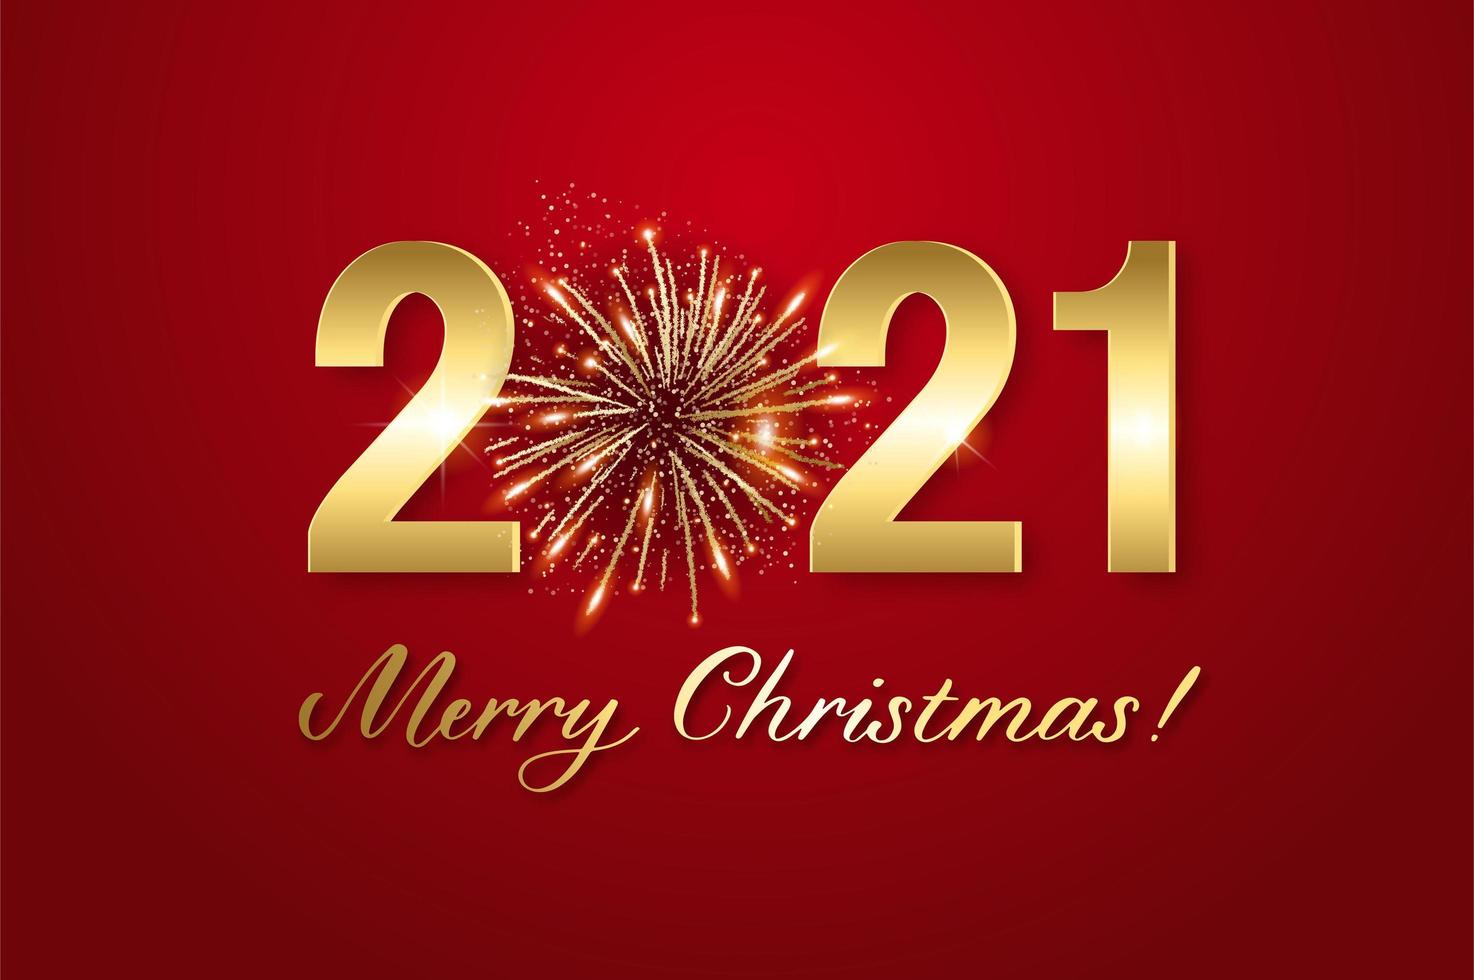 Merry Christmas 2021. Background with shining numerals and firework. New year and Christmas card illustration on red background. vector